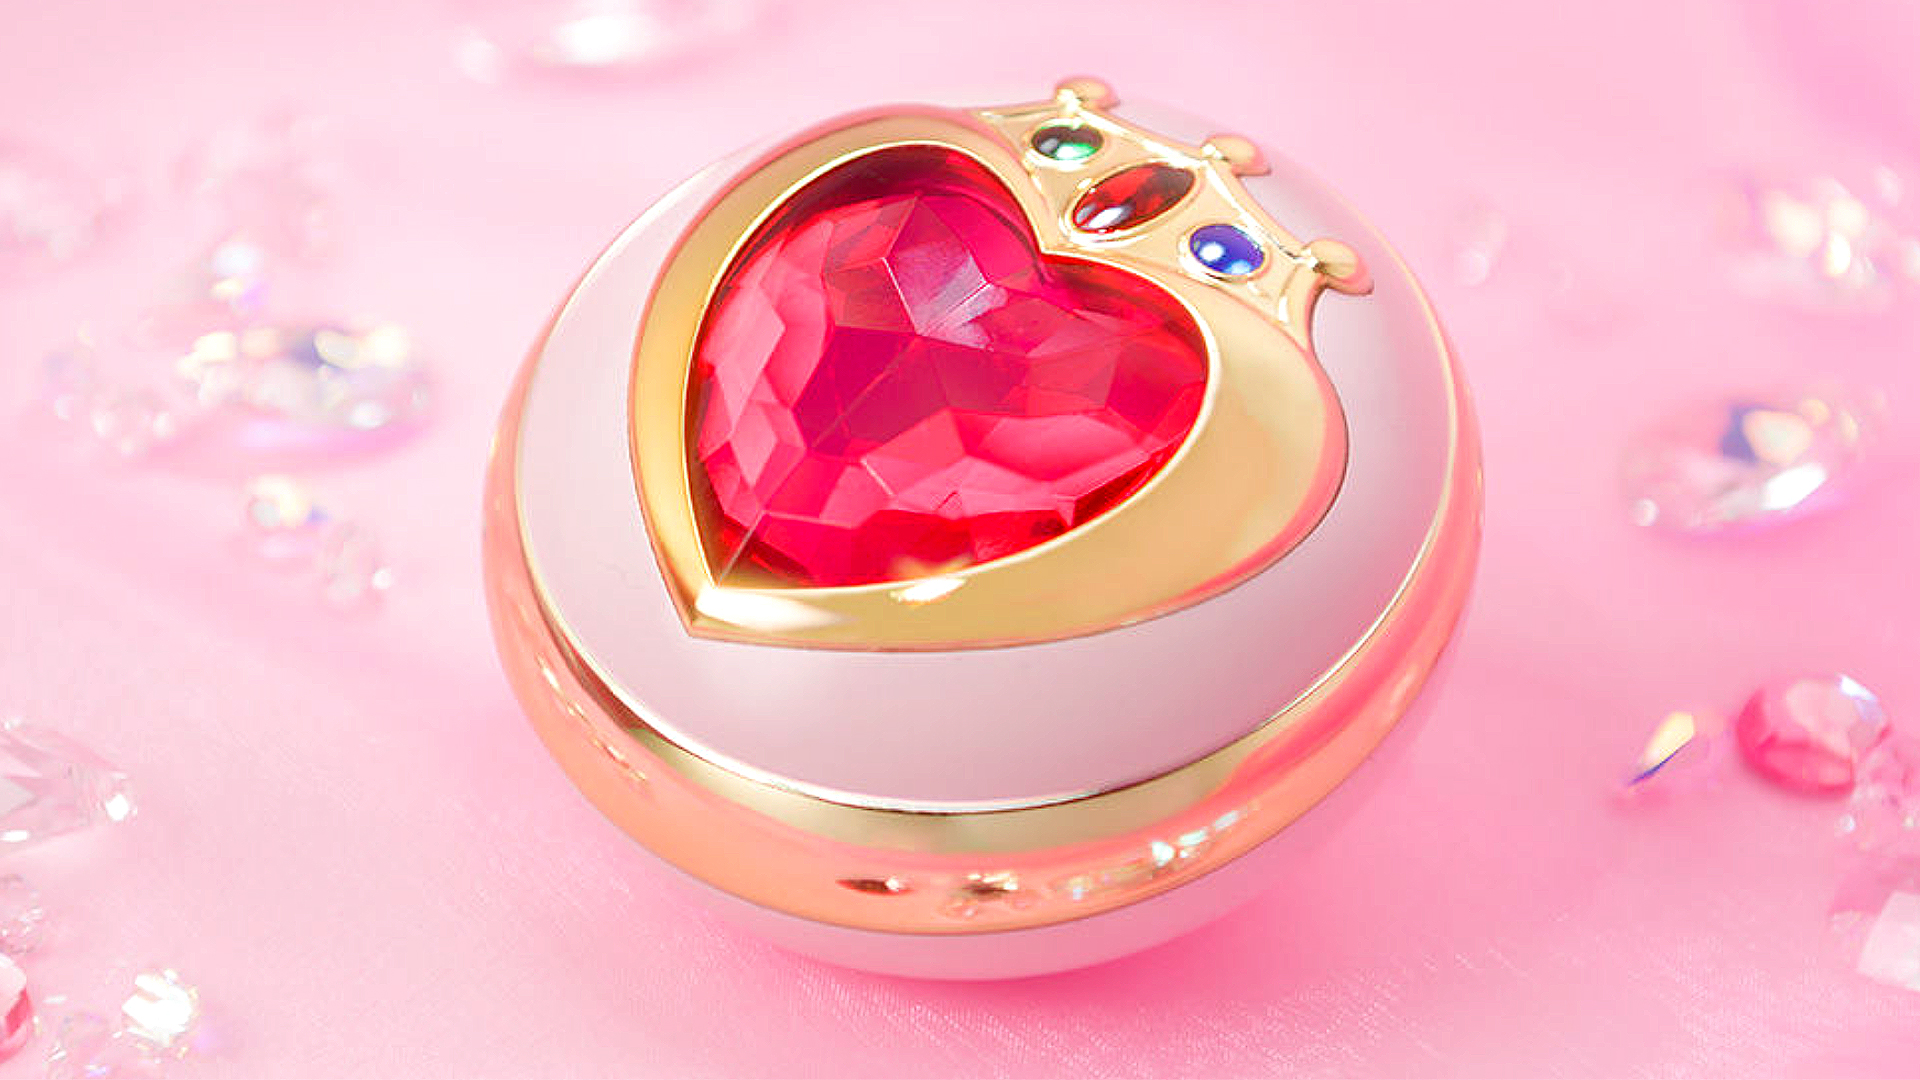 Sailor Mini Moon's Prism Heart Compact Proplica next to real pink crystals.